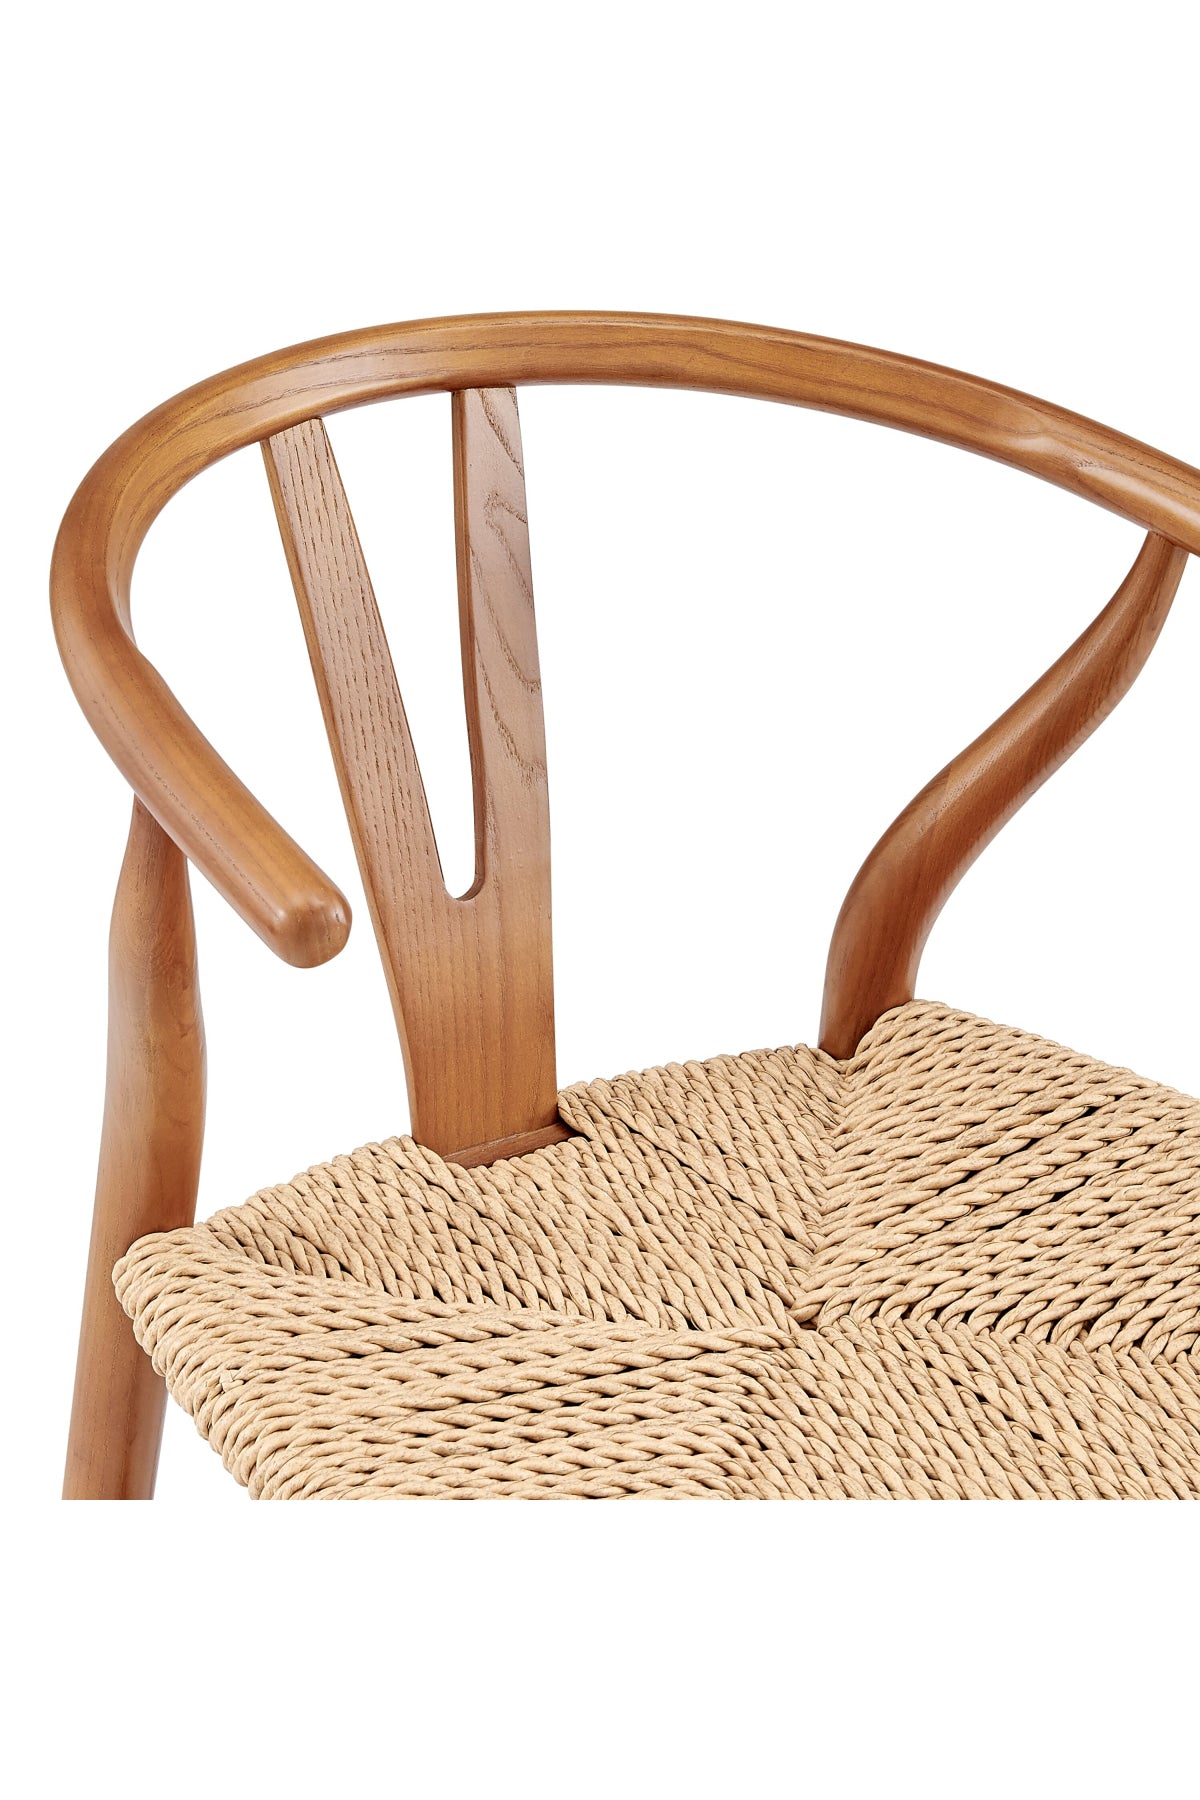 Fowler Outdoor Side Chair - Set of 2